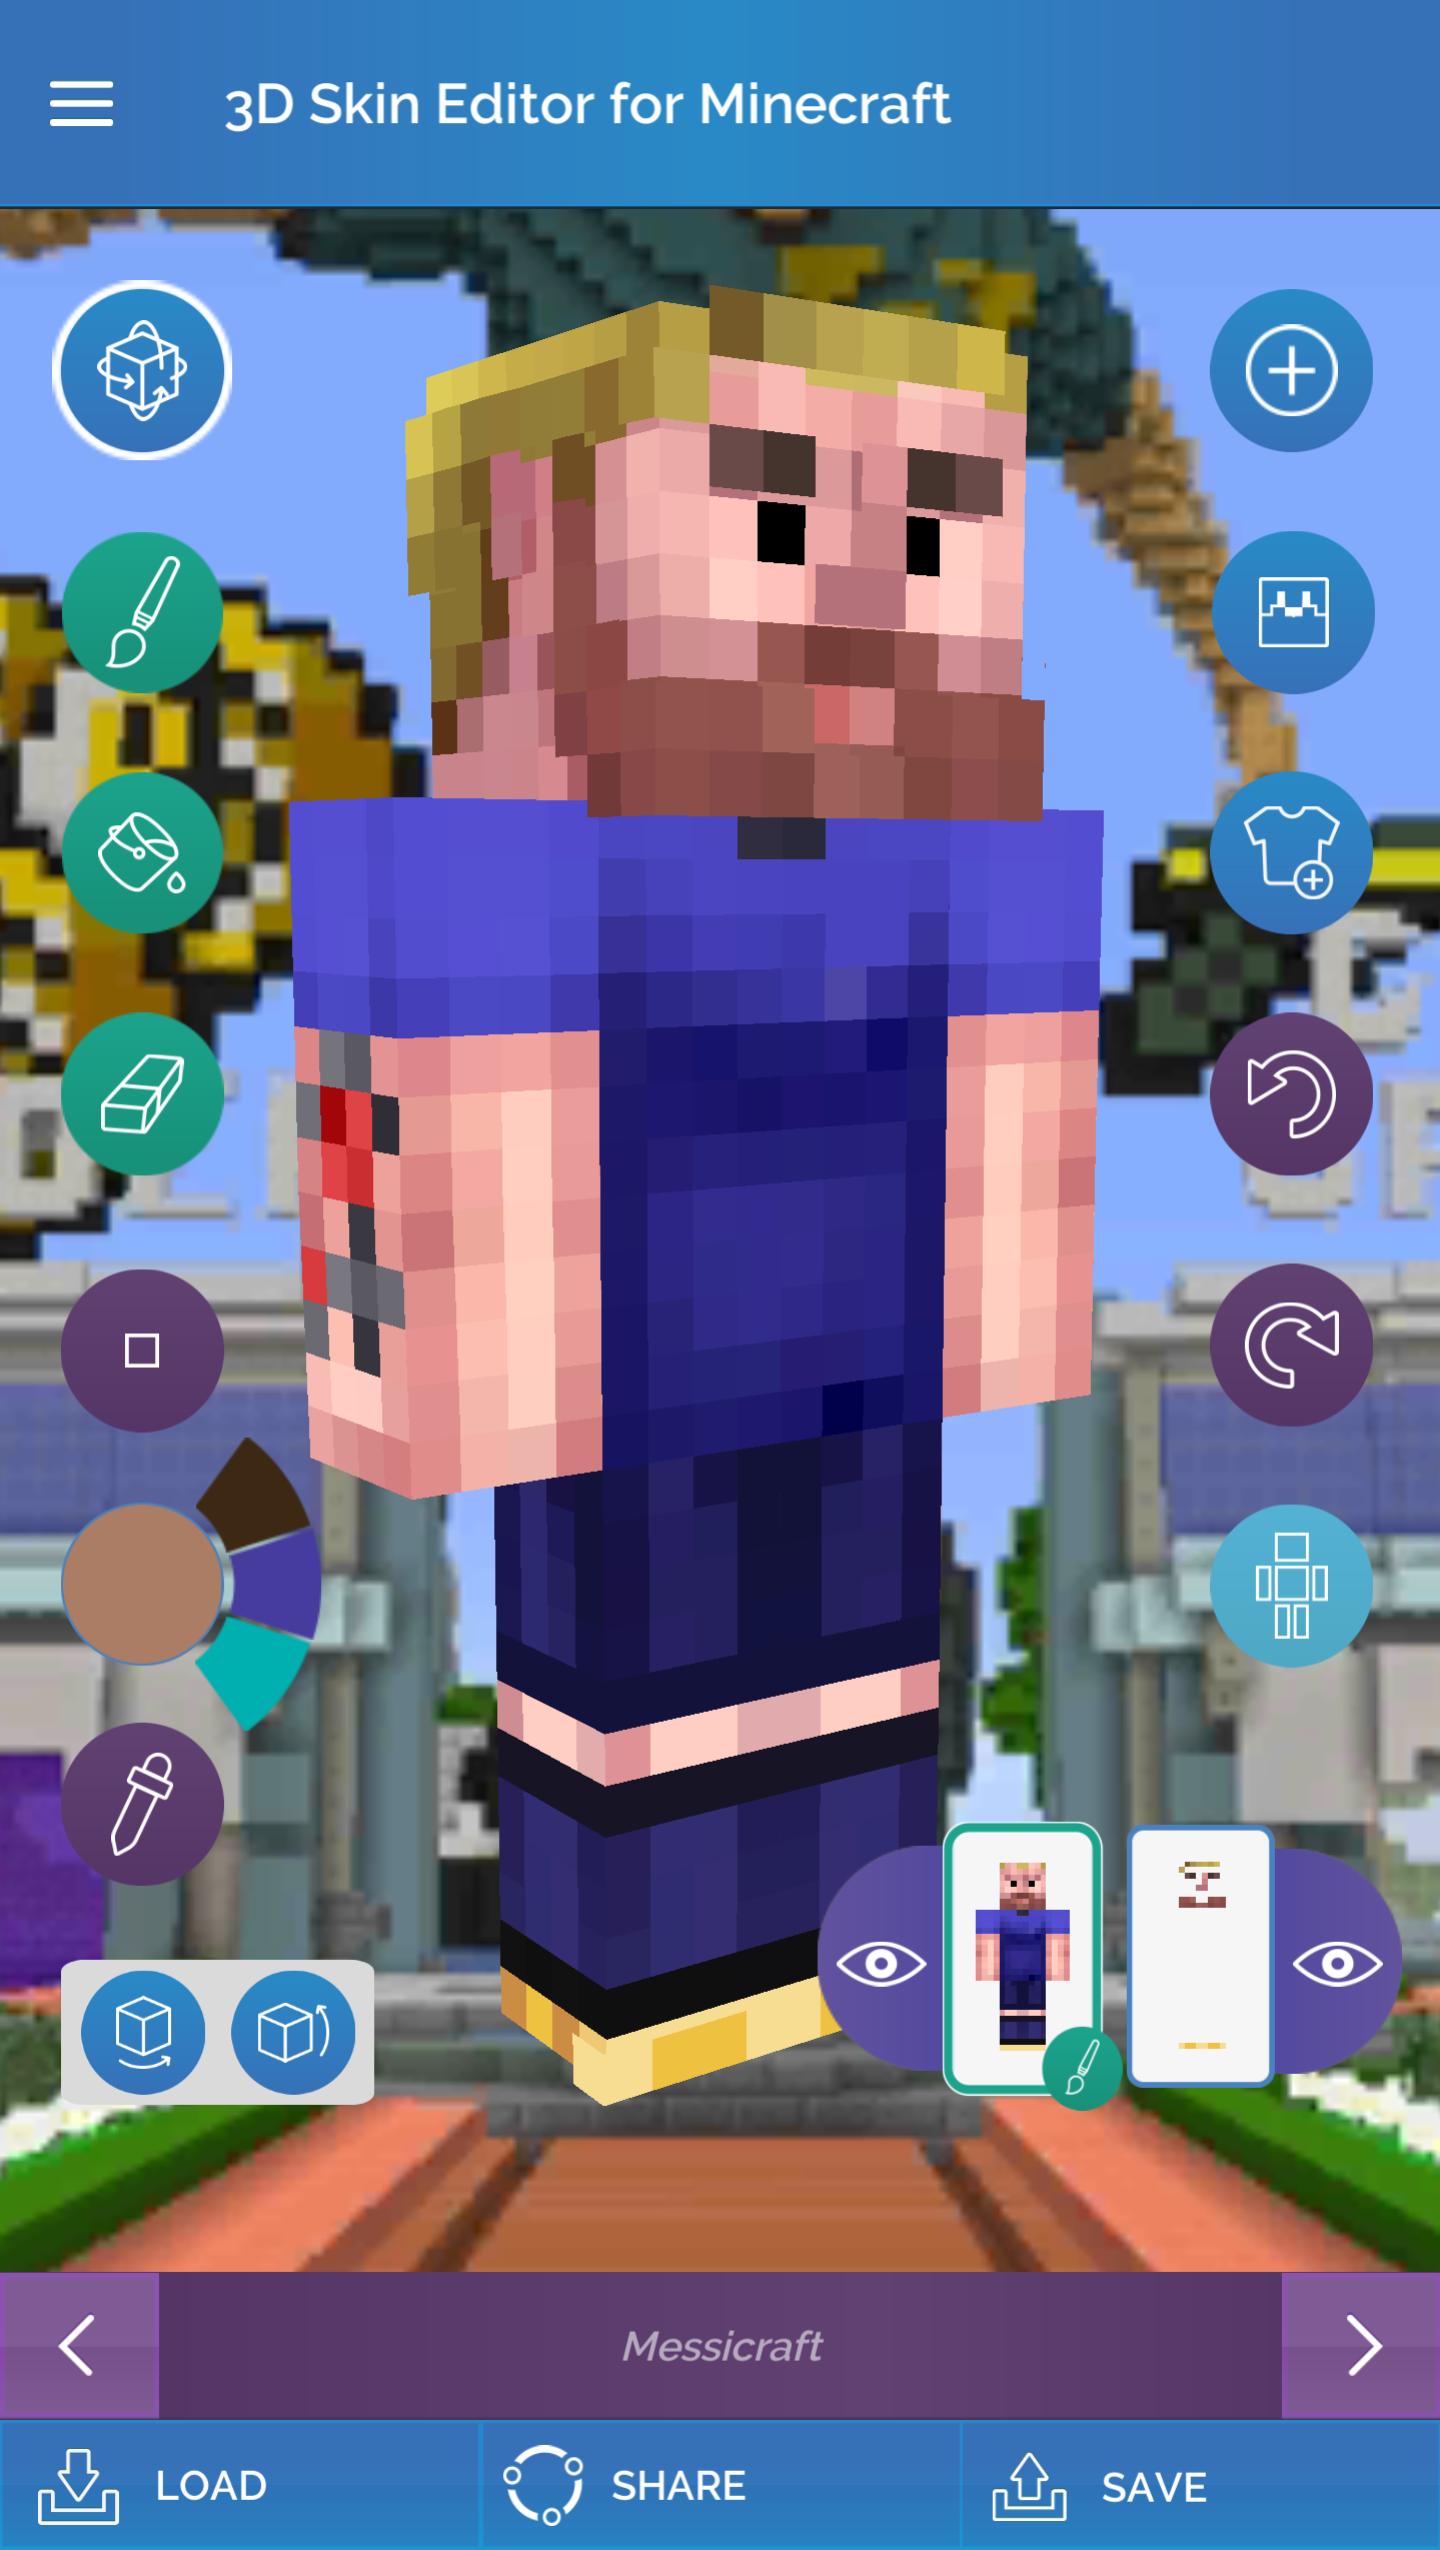 QB9's 3D Skin Editor for Minecraft for Android - APK Download